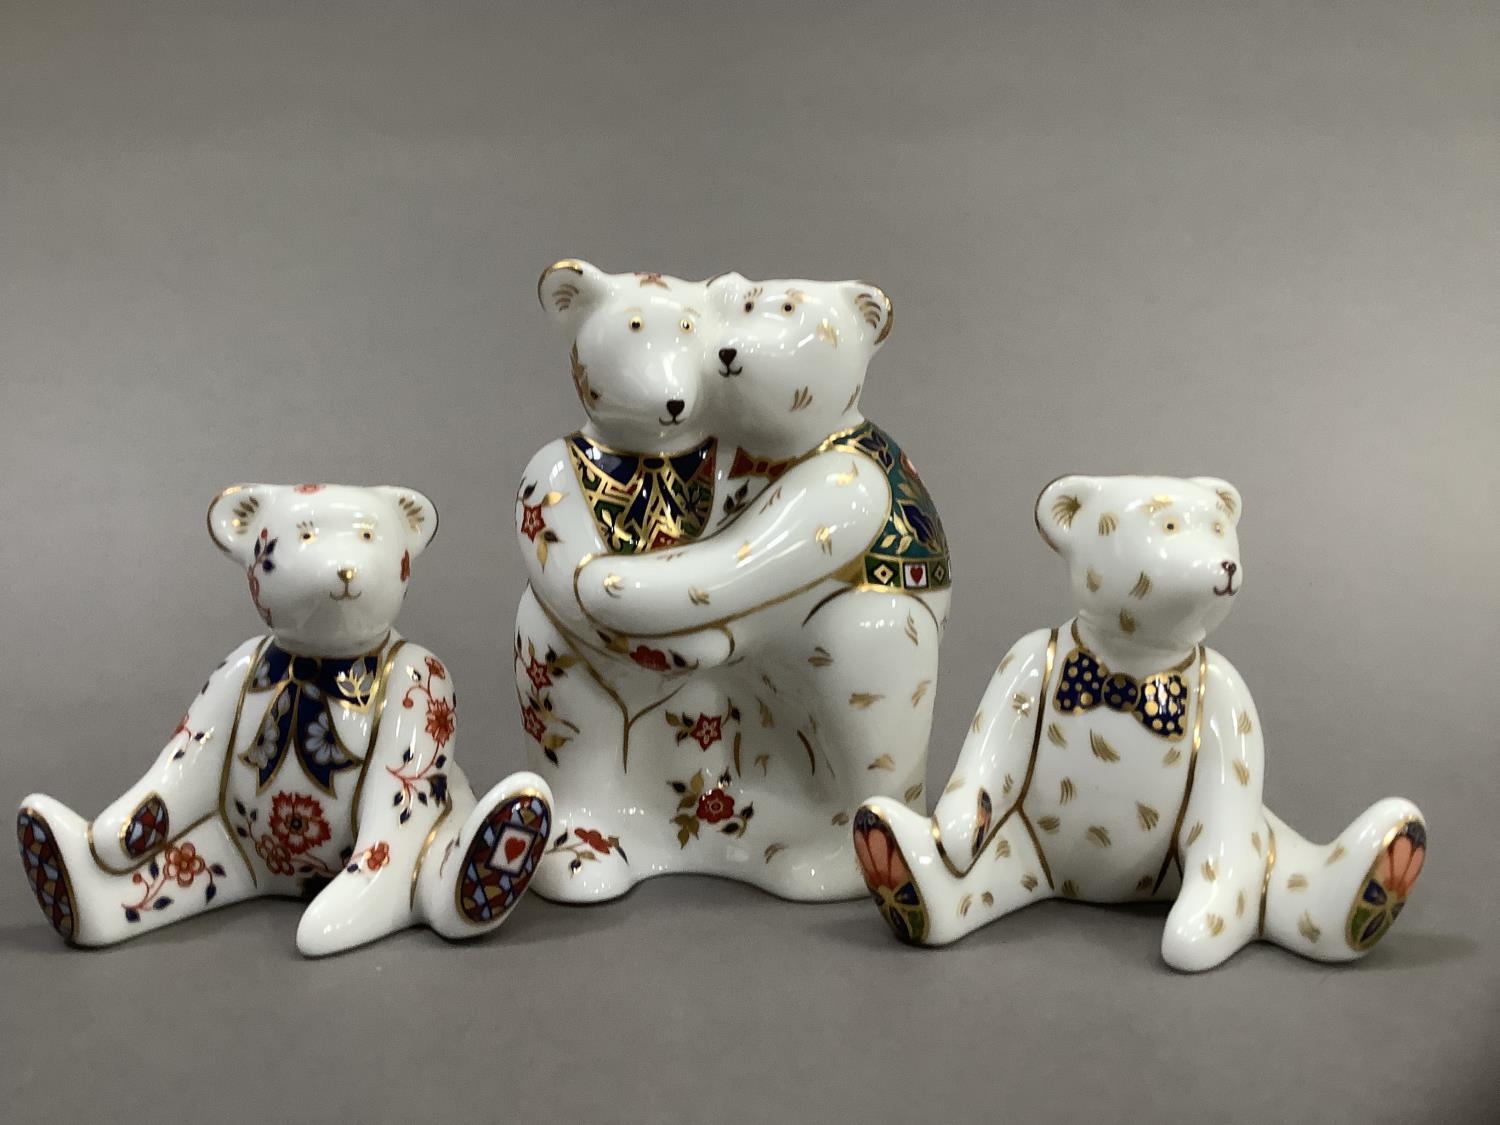 A Royal Crown Derby model of two bears hugging together with two seated bears, 9cm and 6.5cm